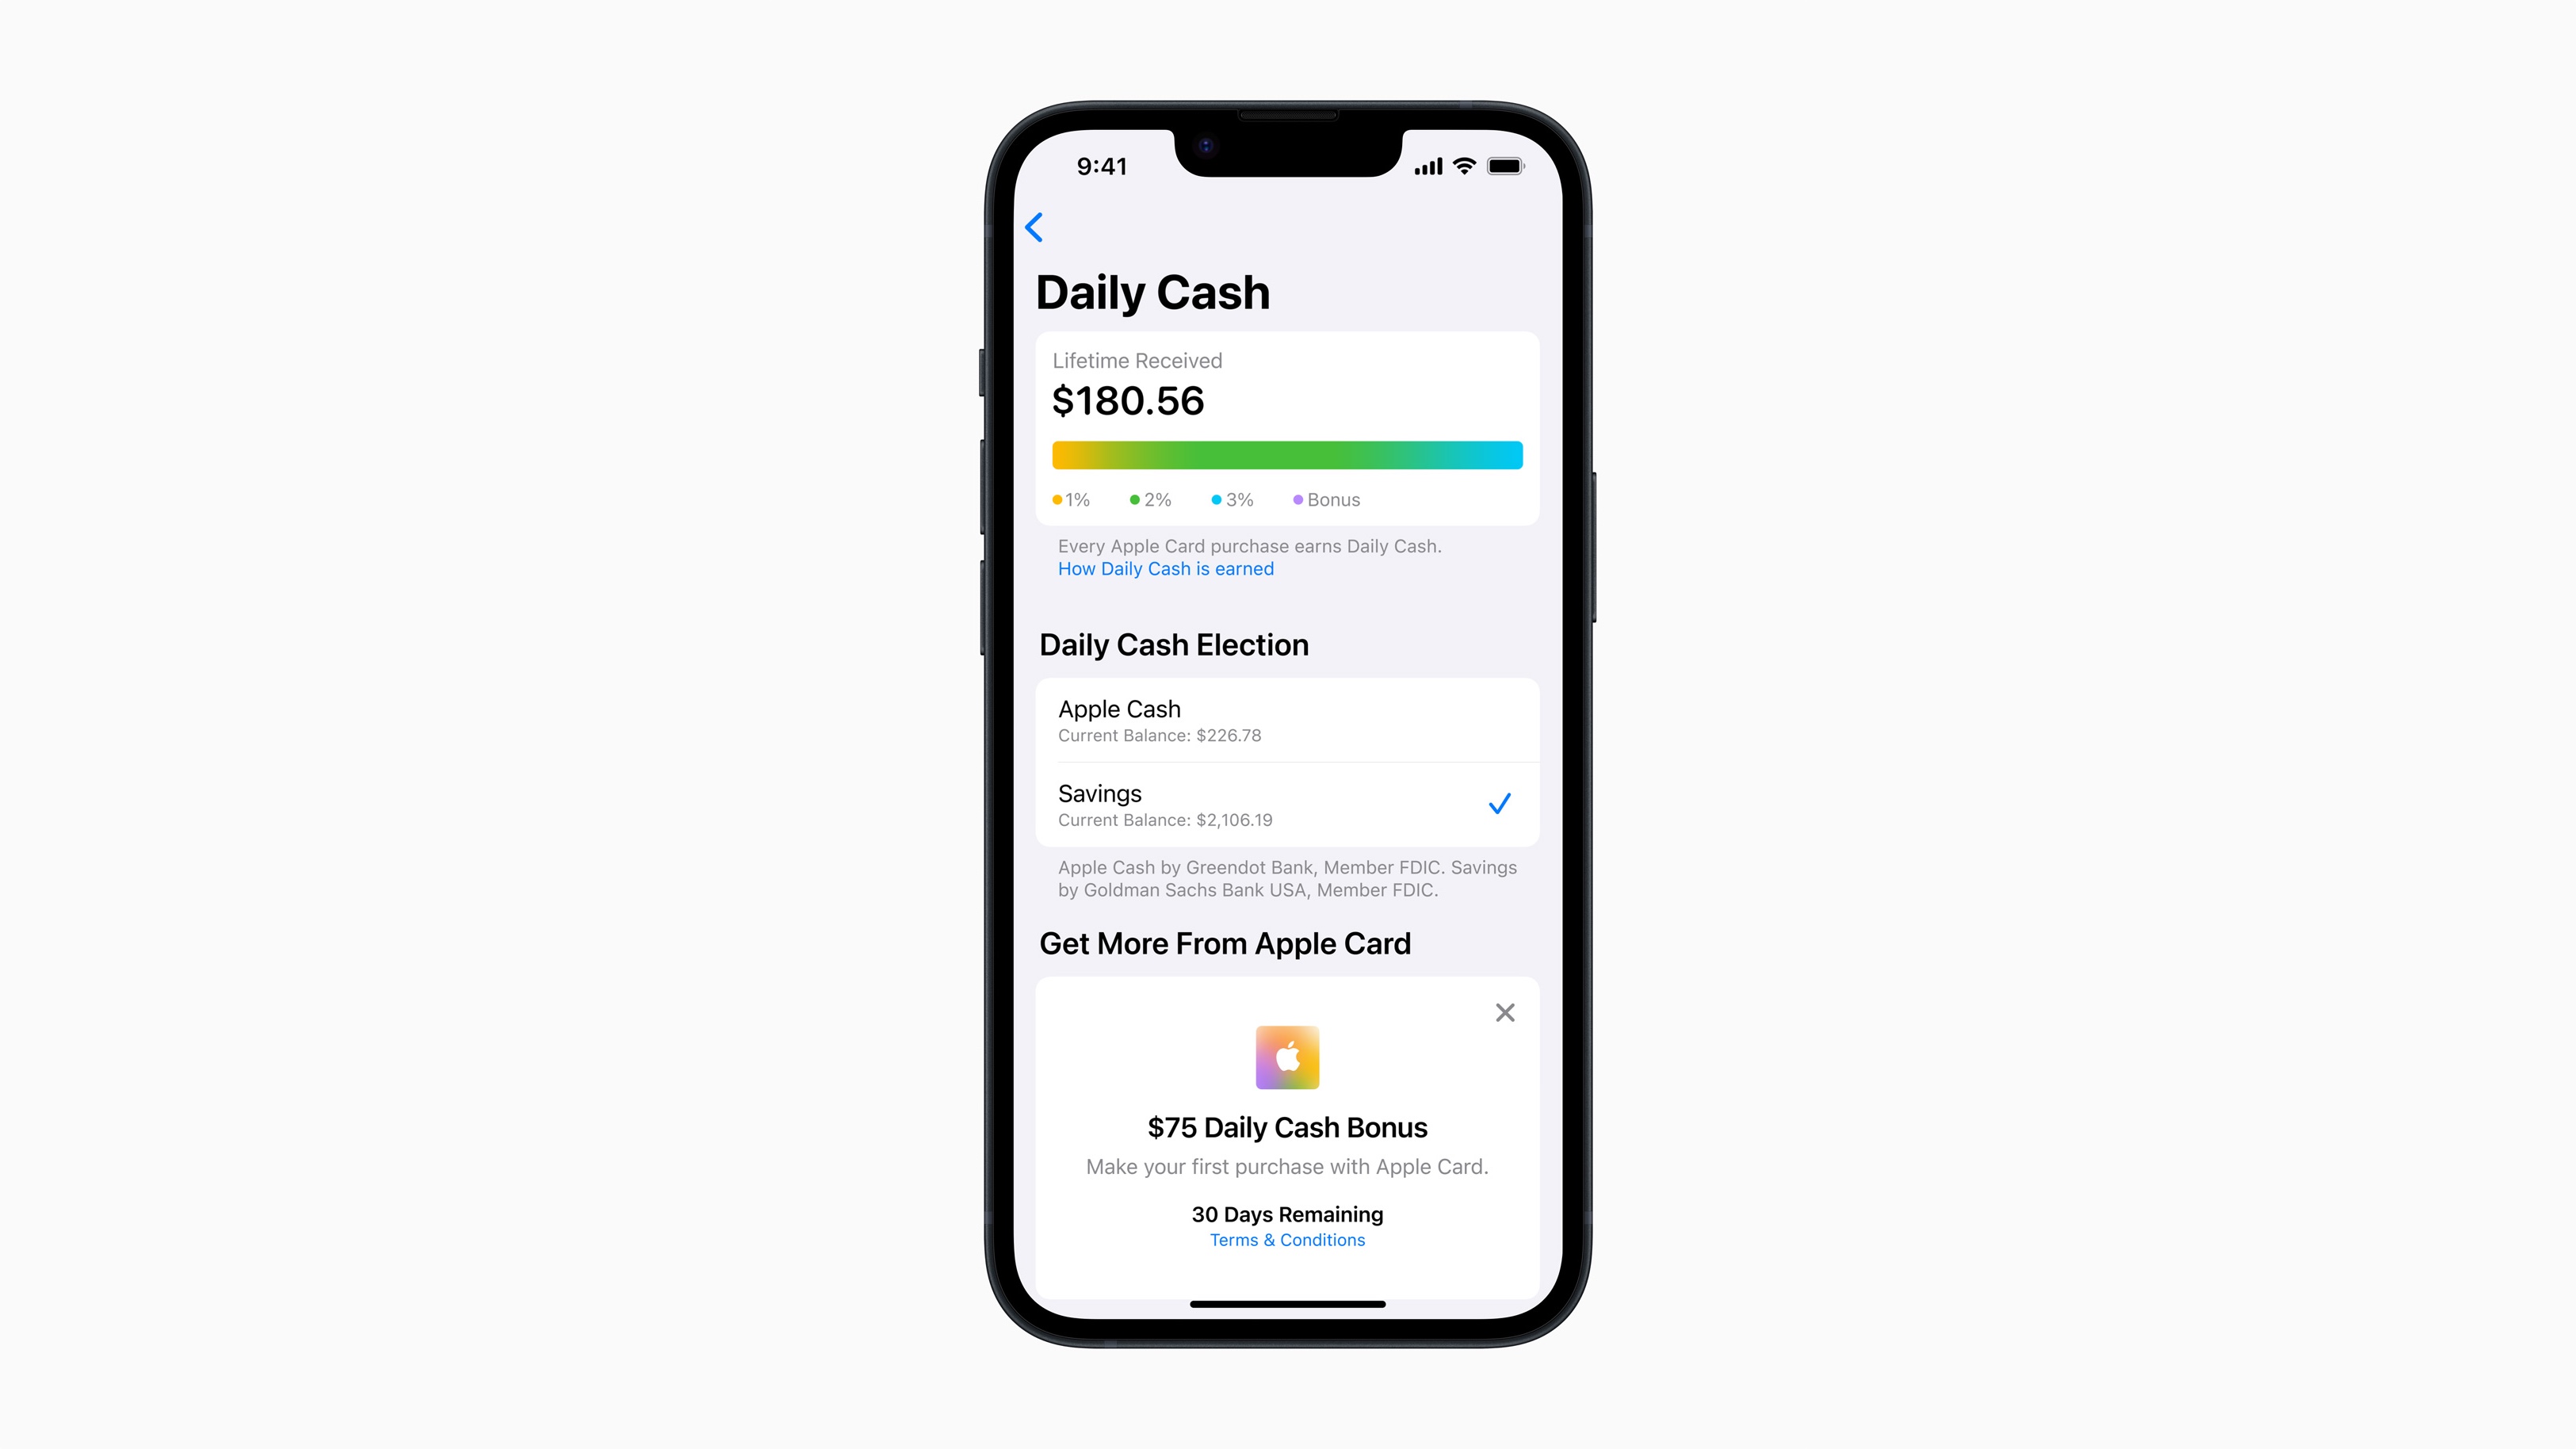 Apple Card users will be able to easily set up and manage Savings directly in their Apple Card in Wallet.